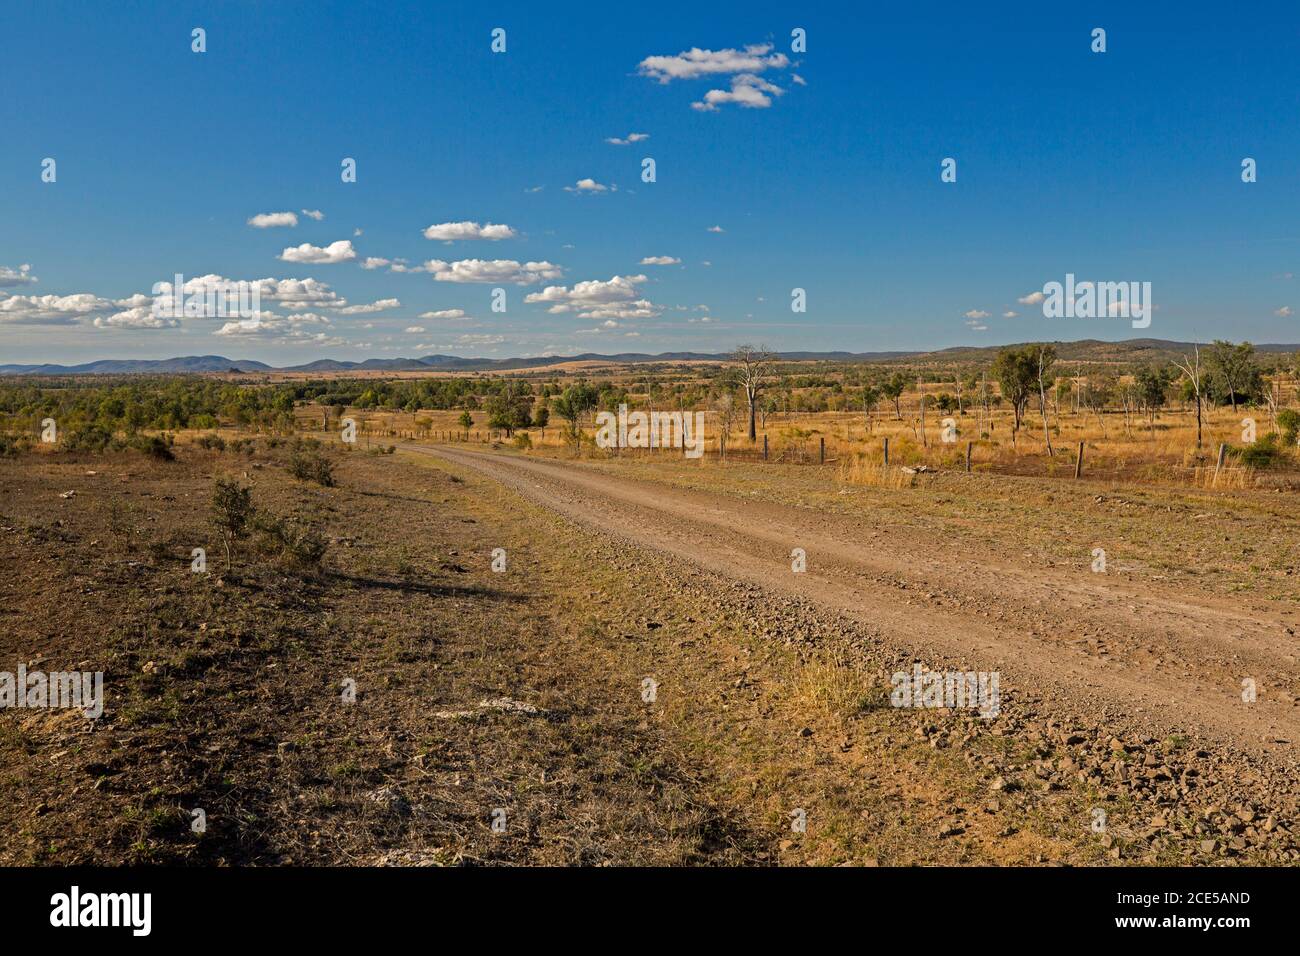 Arid Australian outback landscape during drought with red gravel road spearing across plains to distant low ranges under blue sky with clouds Stock Photo